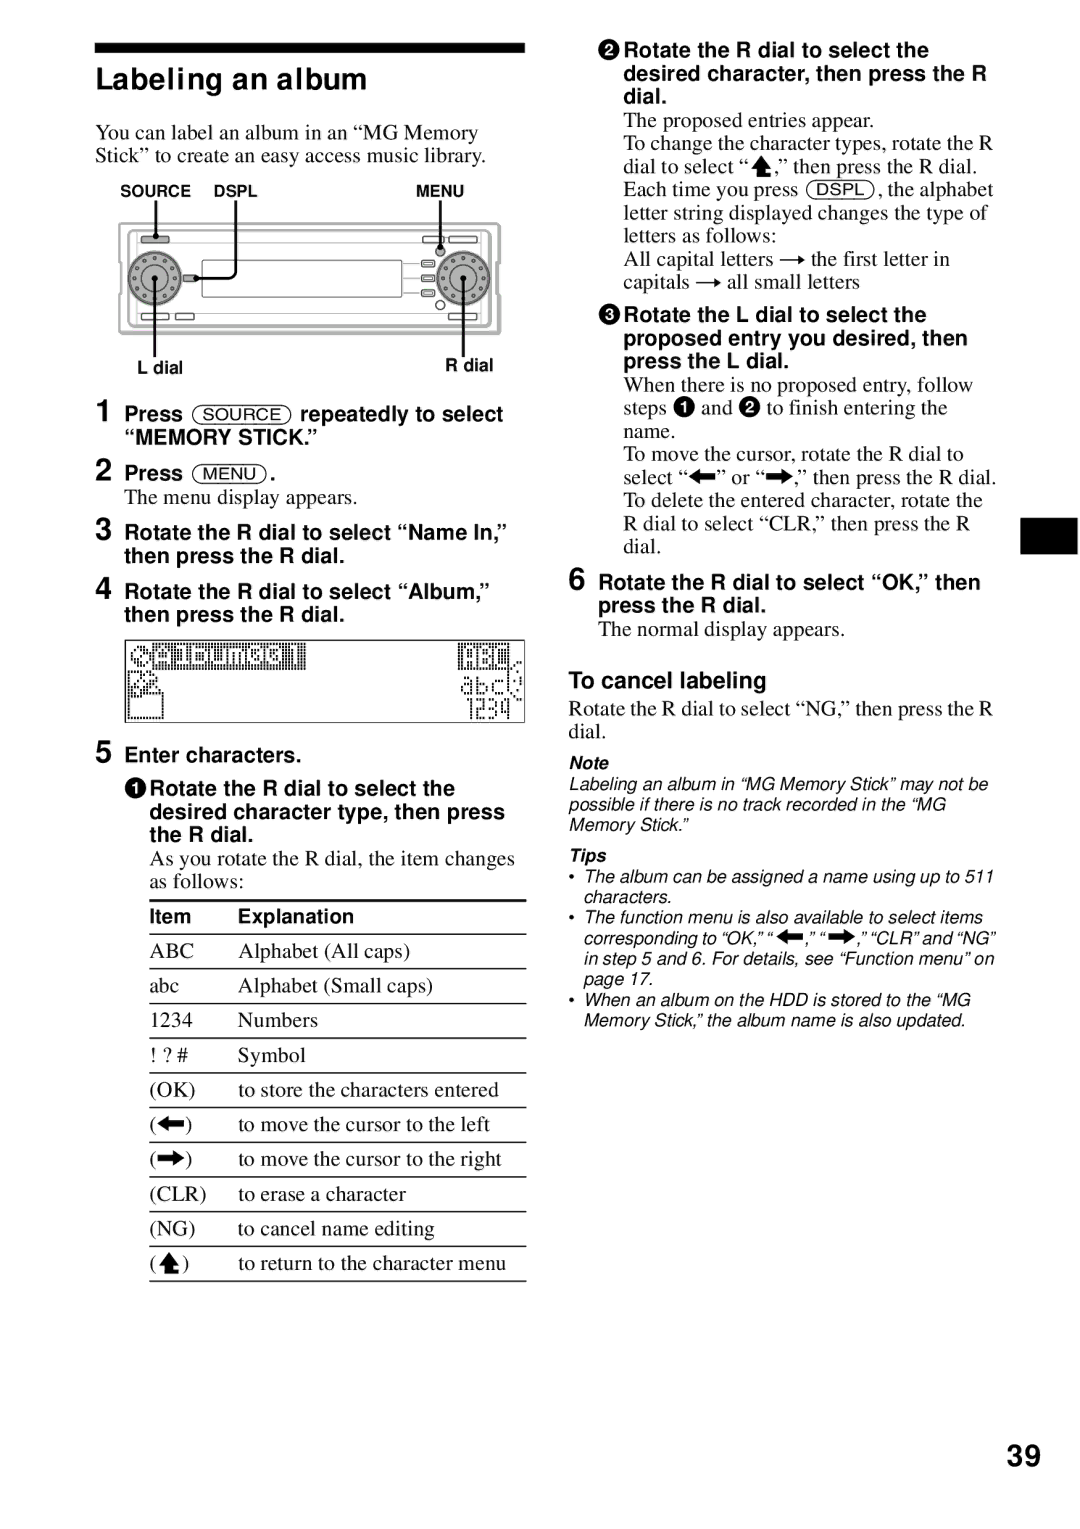 Sony MEX-1HD operating instructions Labeling an album, Rotate the R dial to select NG, then press the R dial 